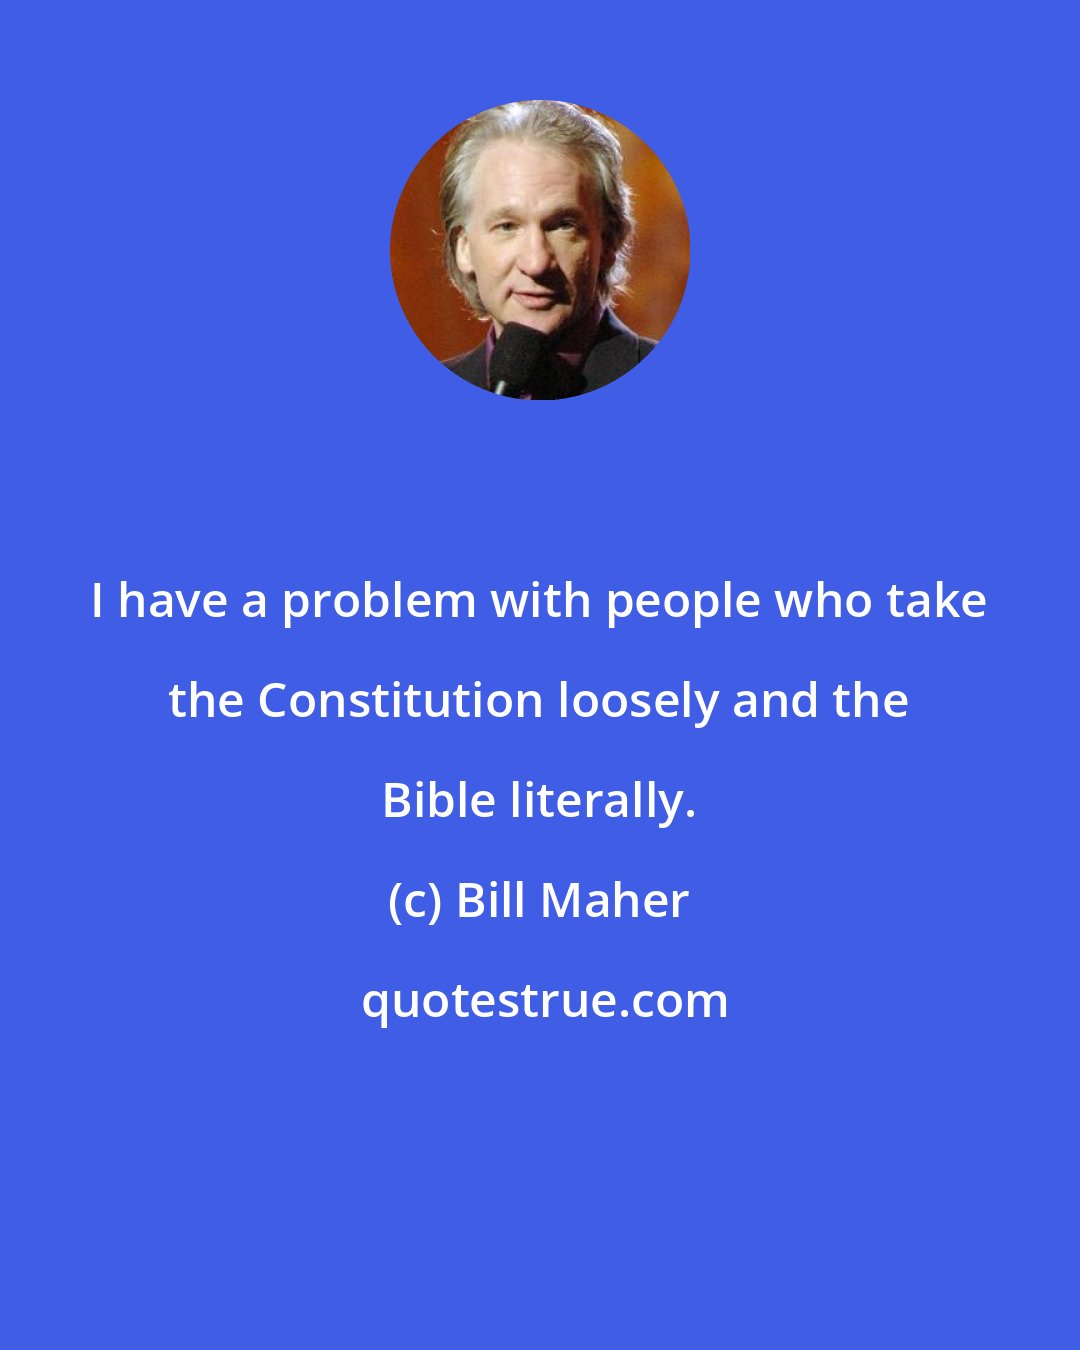 Bill Maher: I have a problem with people who take the Constitution loosely and the Bible literally.